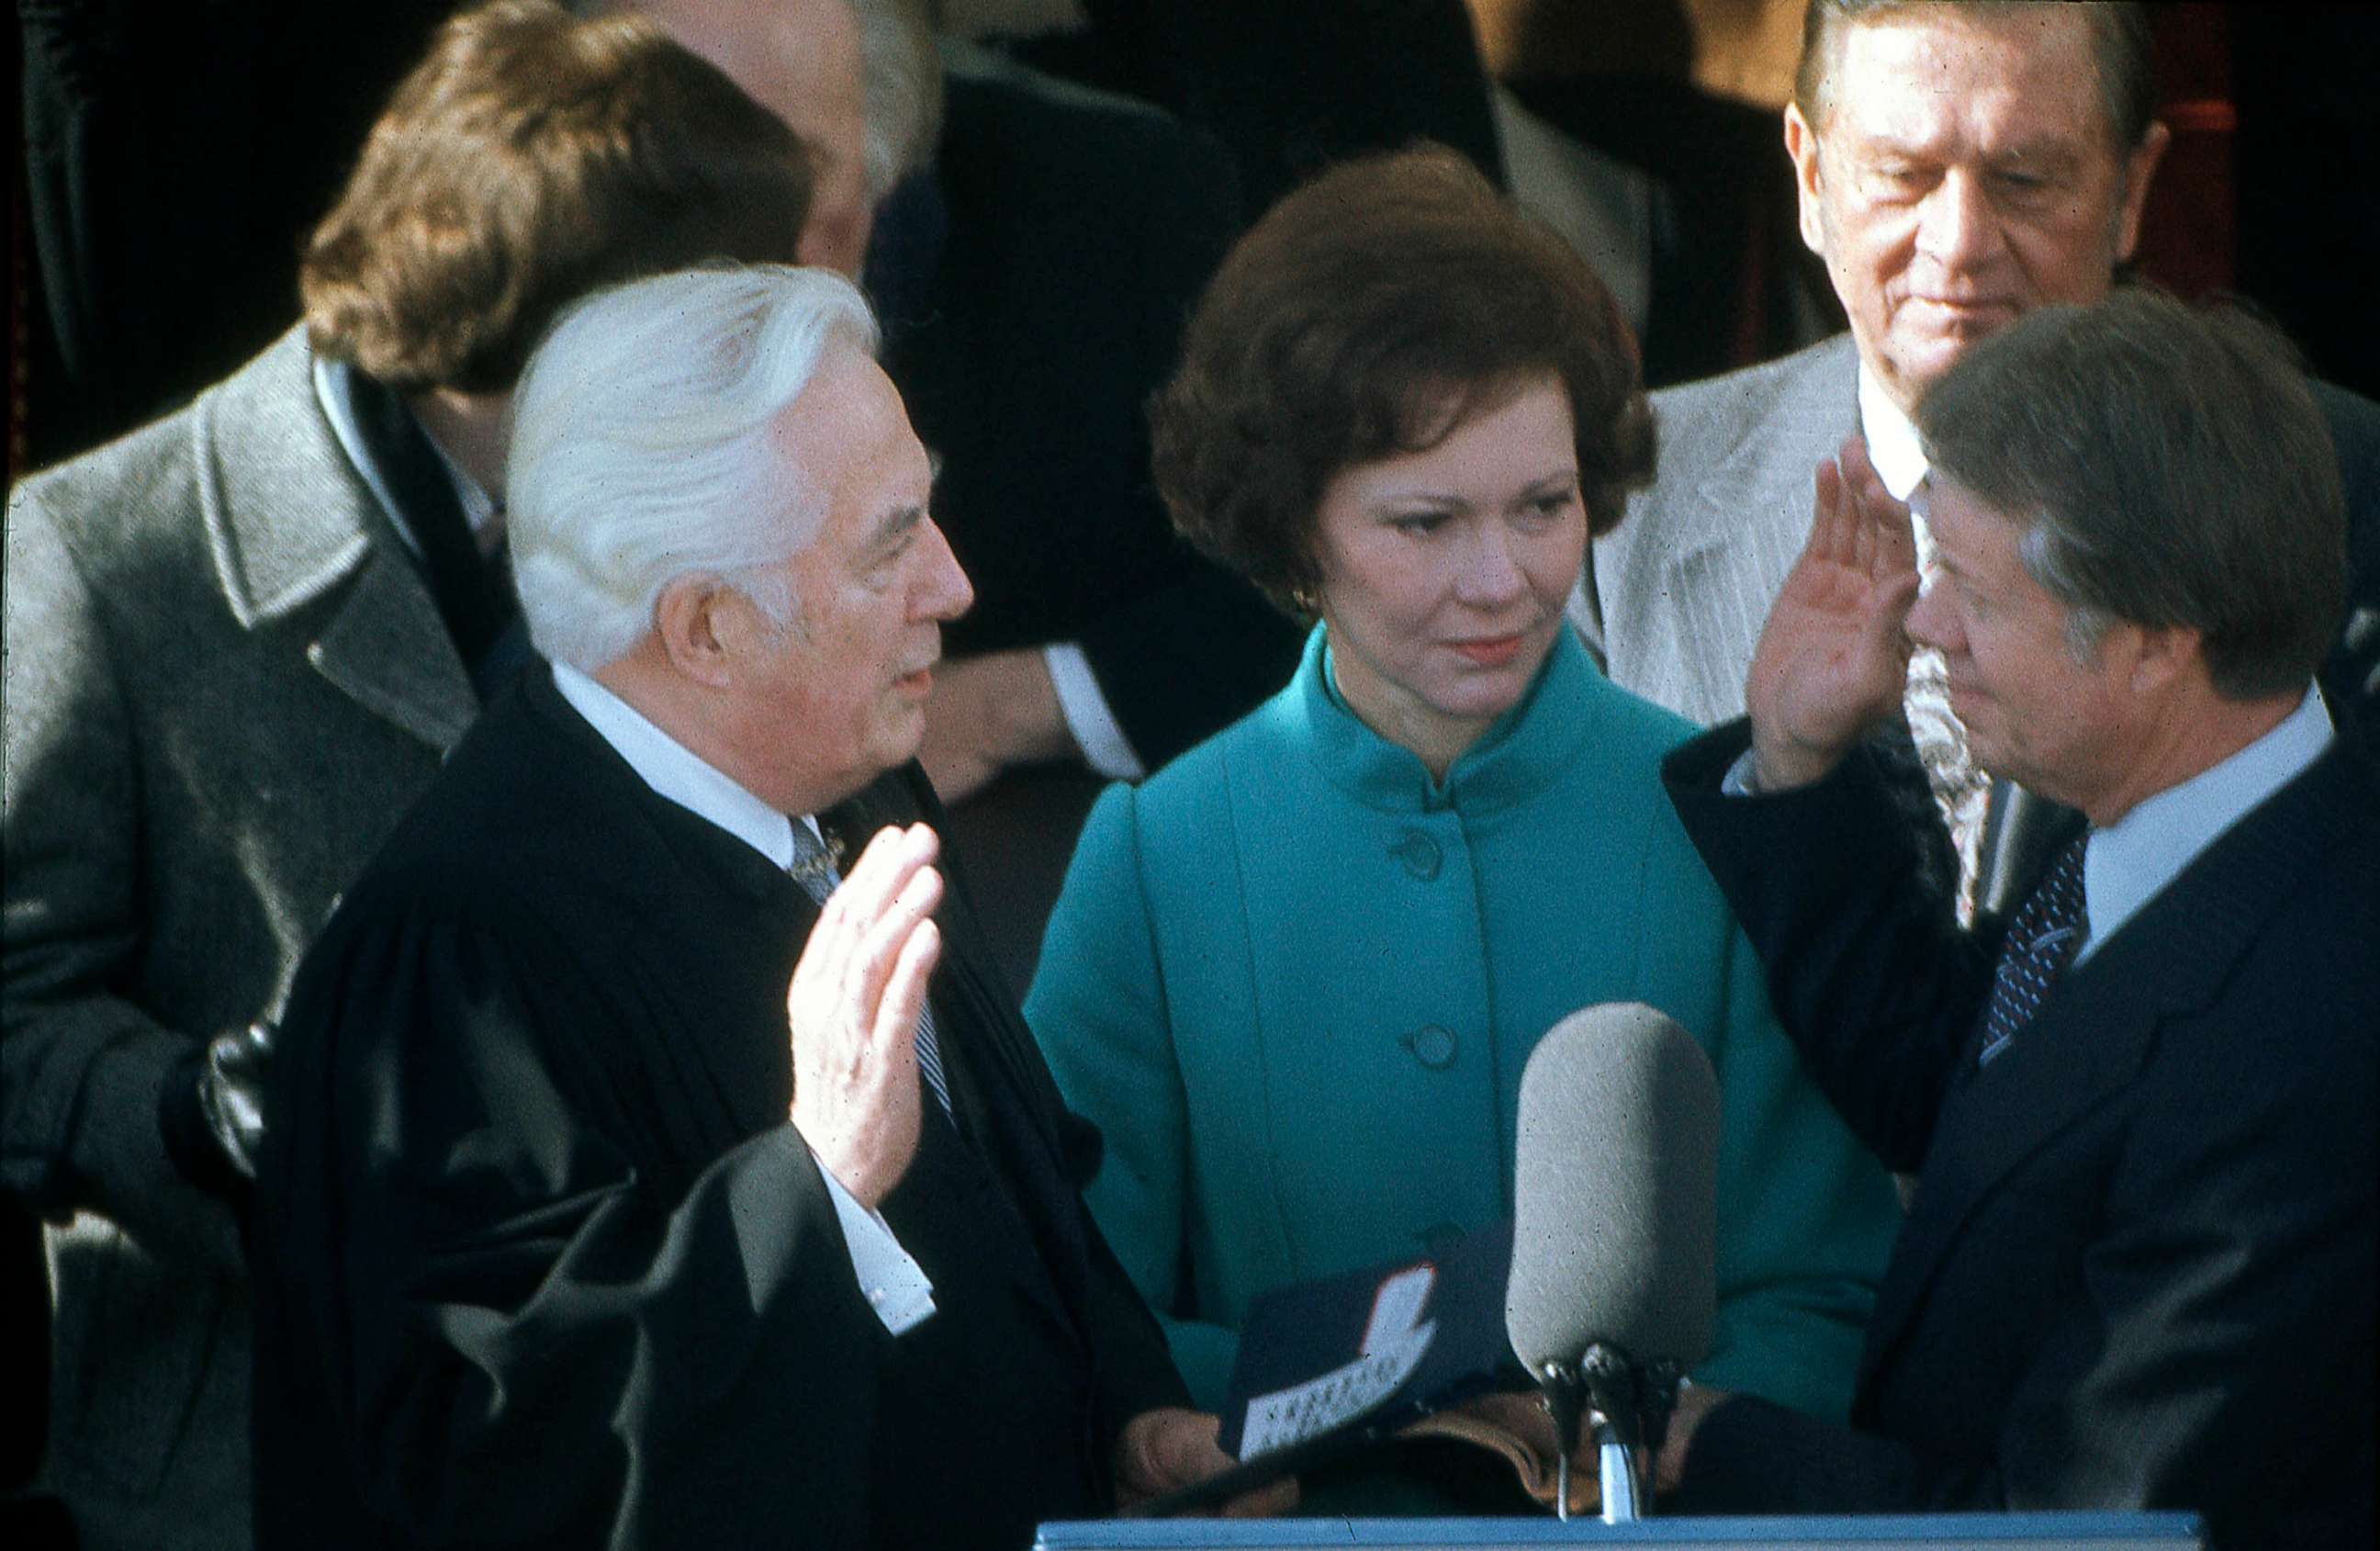 PHOTO: FILE - President Jimmy Carter with wife Rosalyn Carter, takes the oath of office from Chief Justice of the Supreme Court Warren Burger on stage in front of the White House, Jan. 1977.